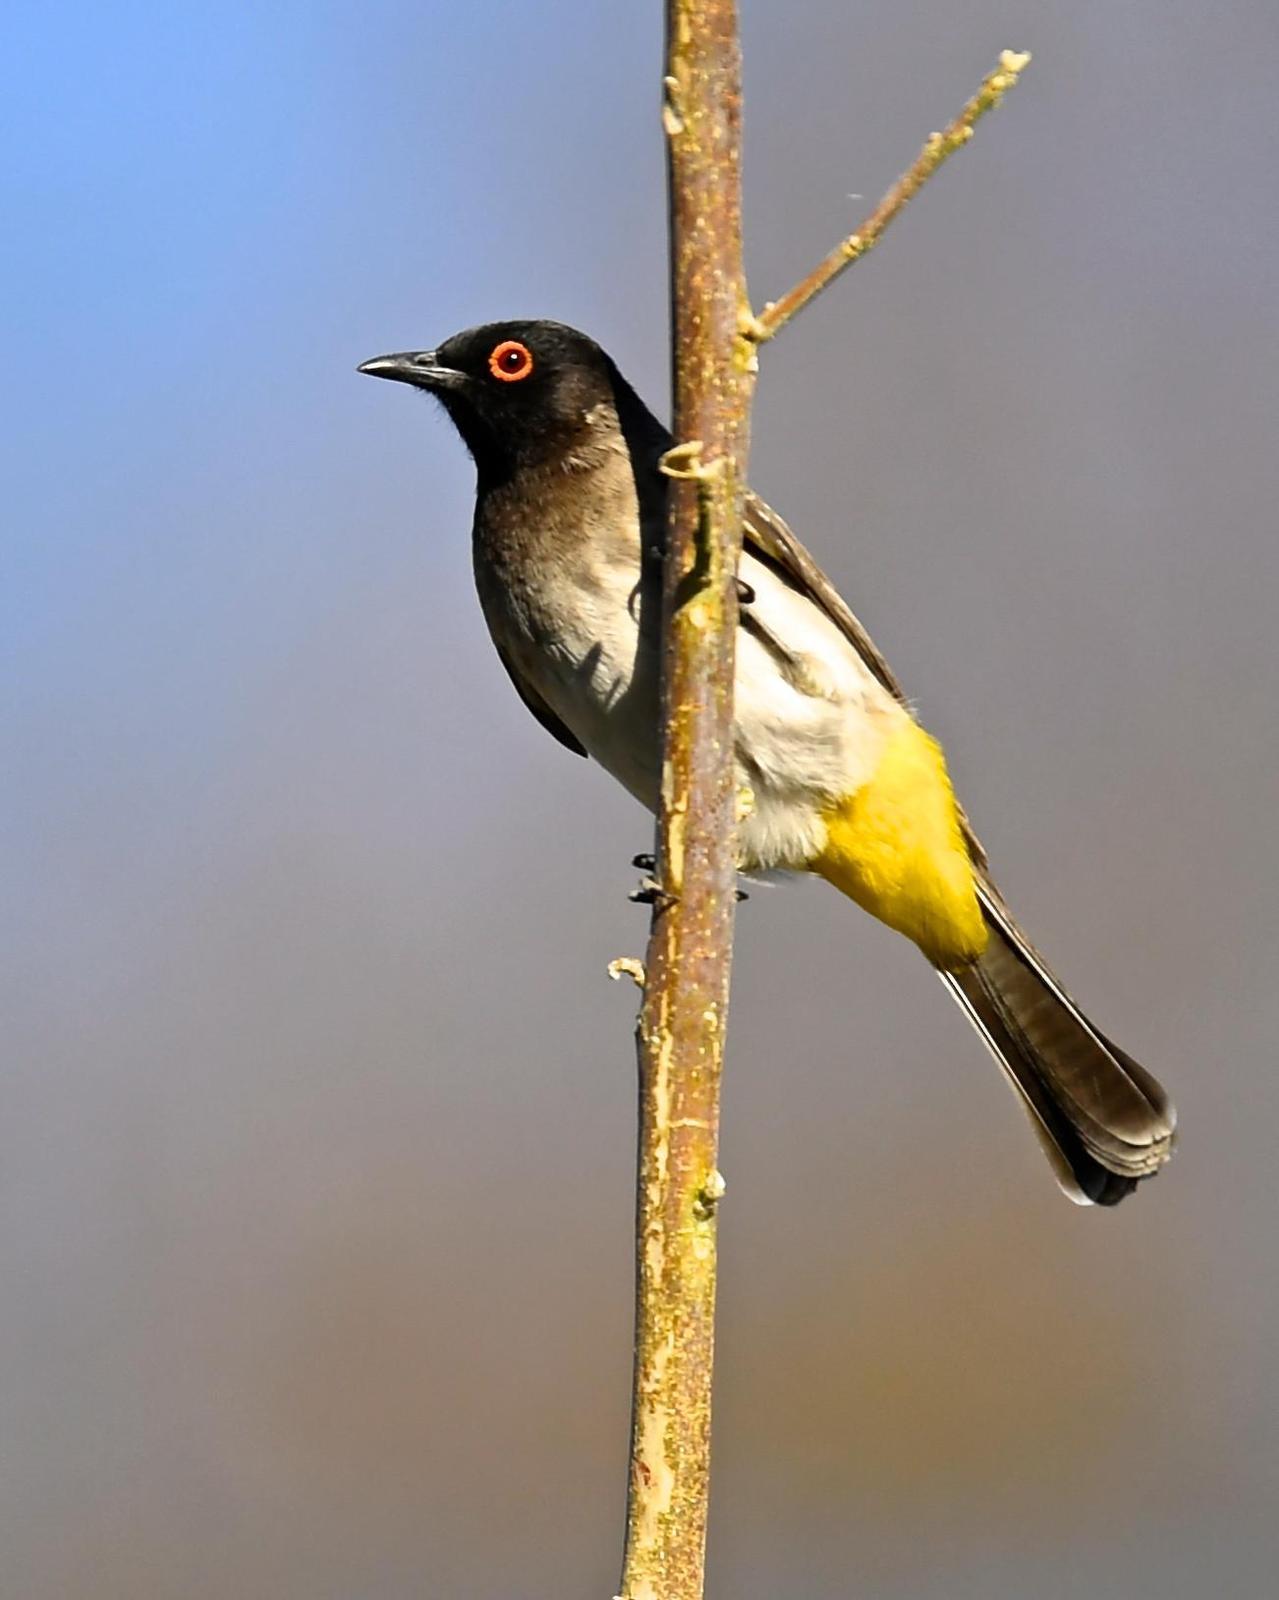 Black-fronted Bulbul Photo by Gerald Friesen